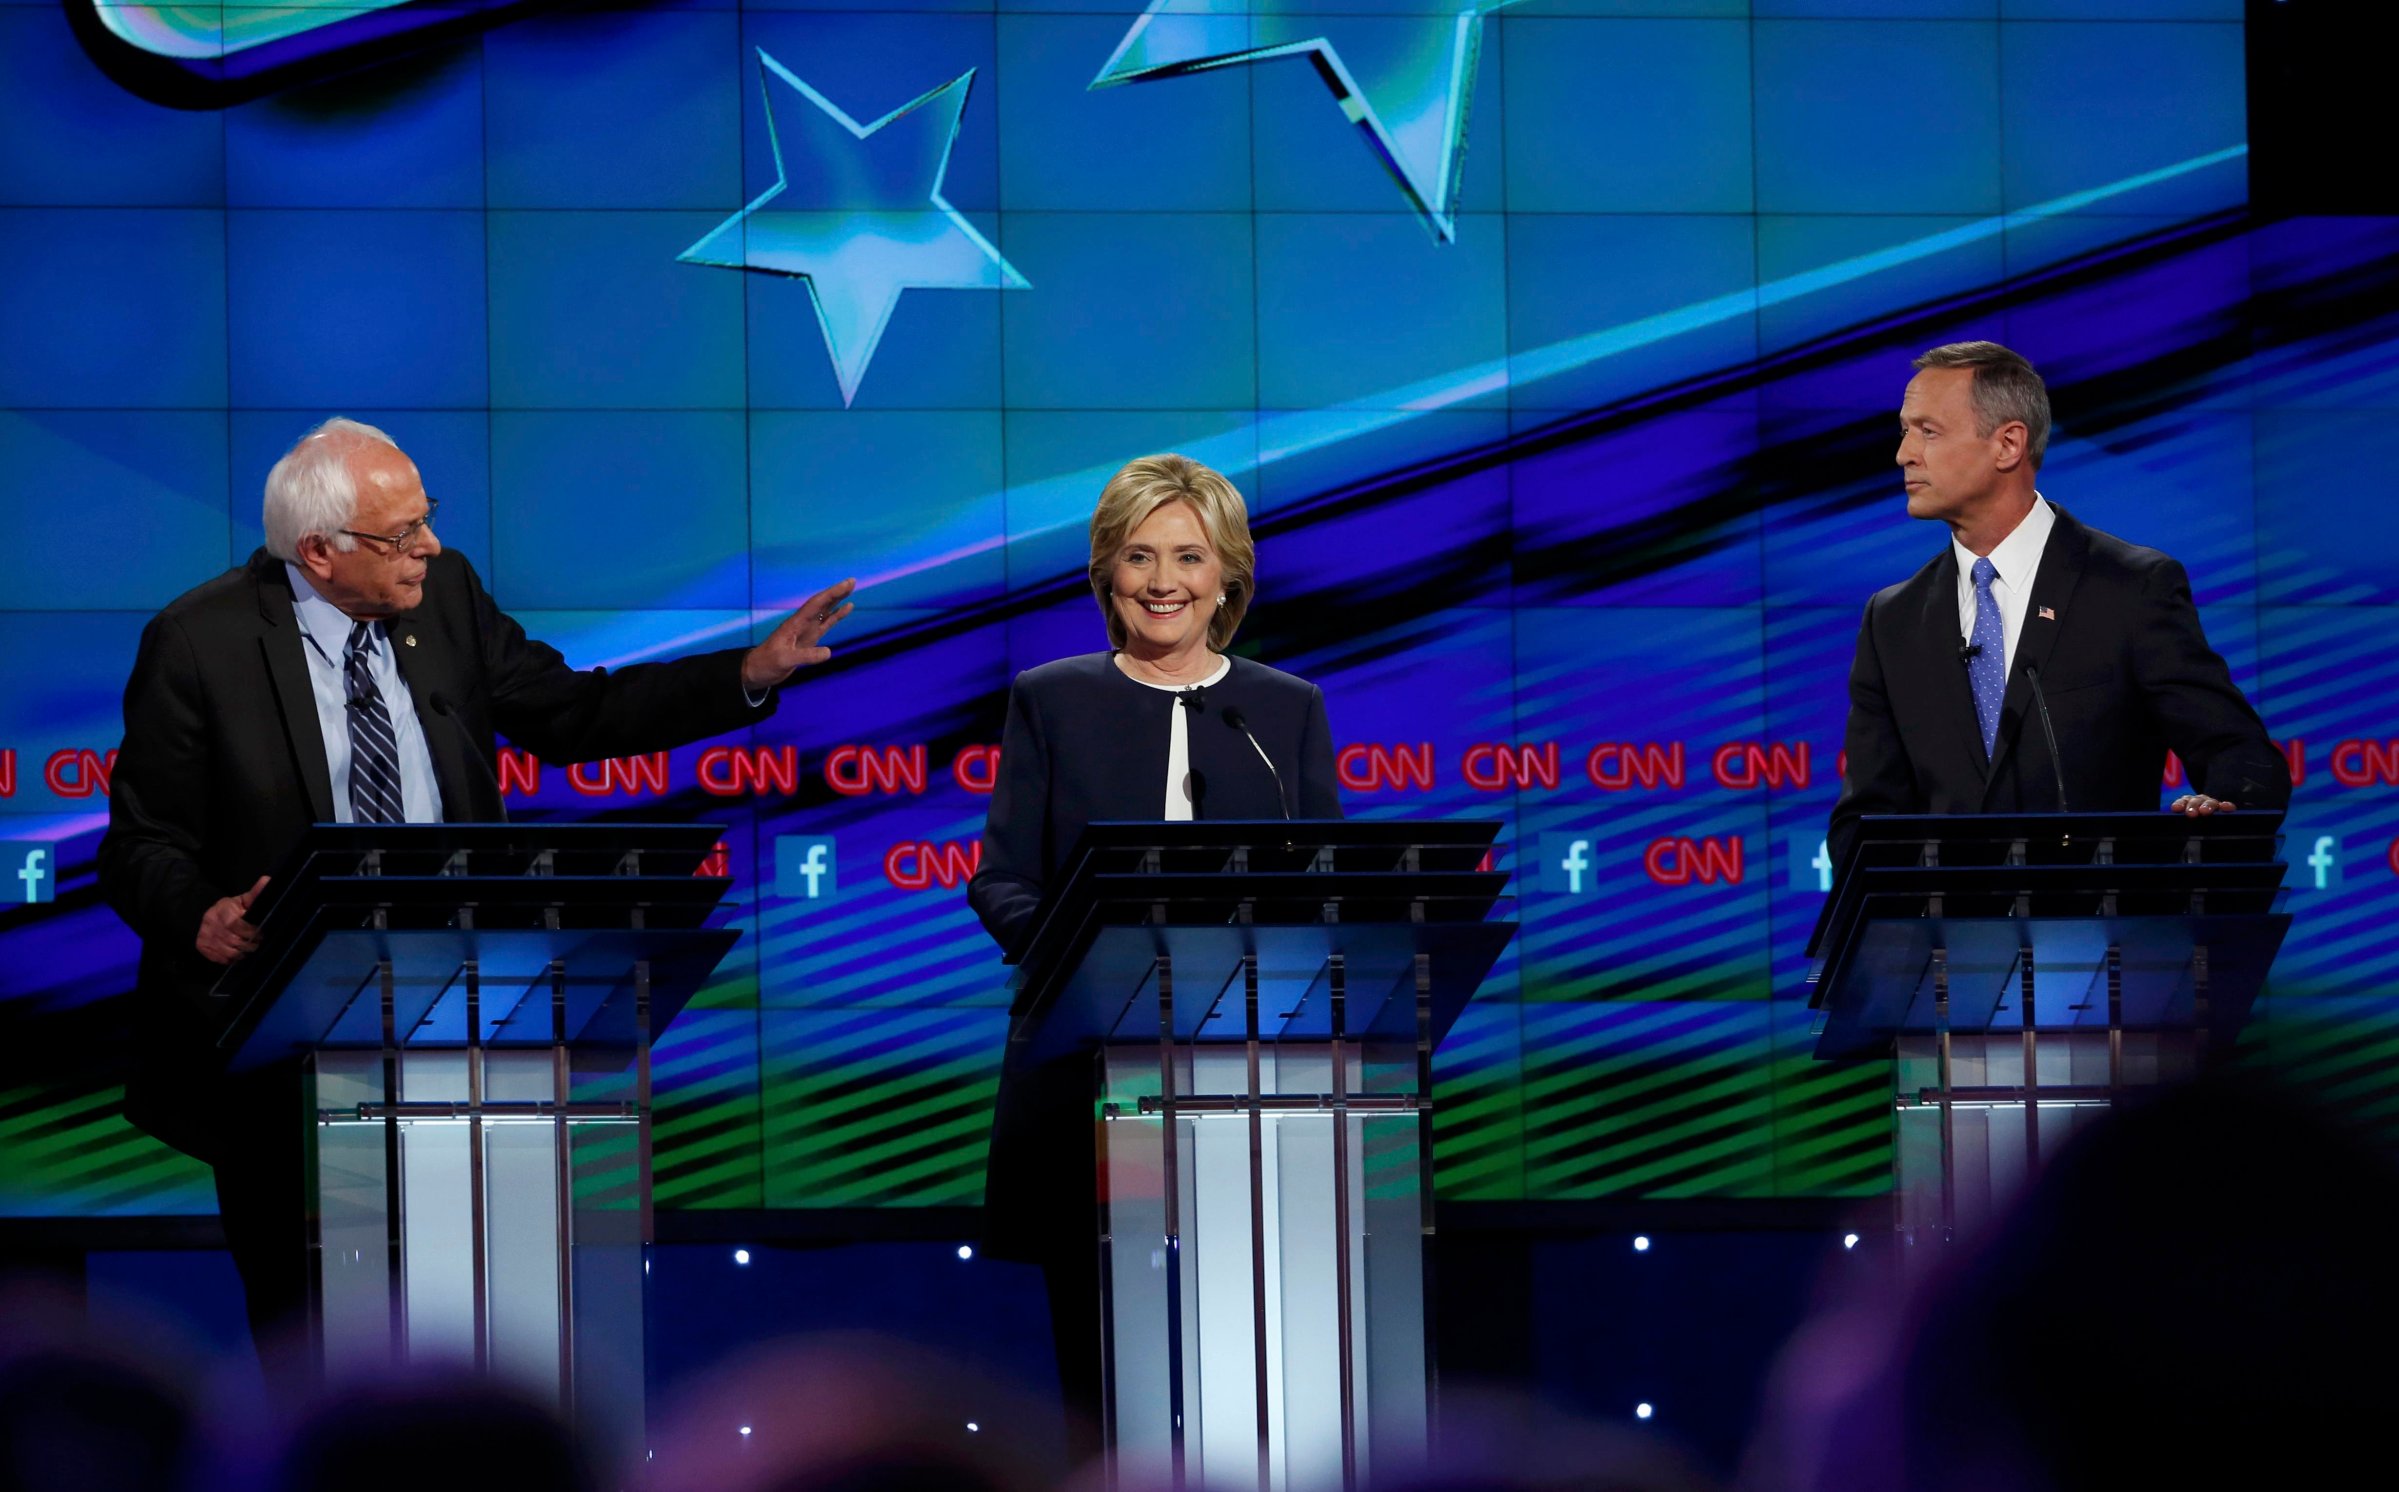 Democratic presidential candidates Sanders, Clinton and O'Malley debate during the first official Democratic candidates debate of the 2016 presidential campaign in Las Vegas